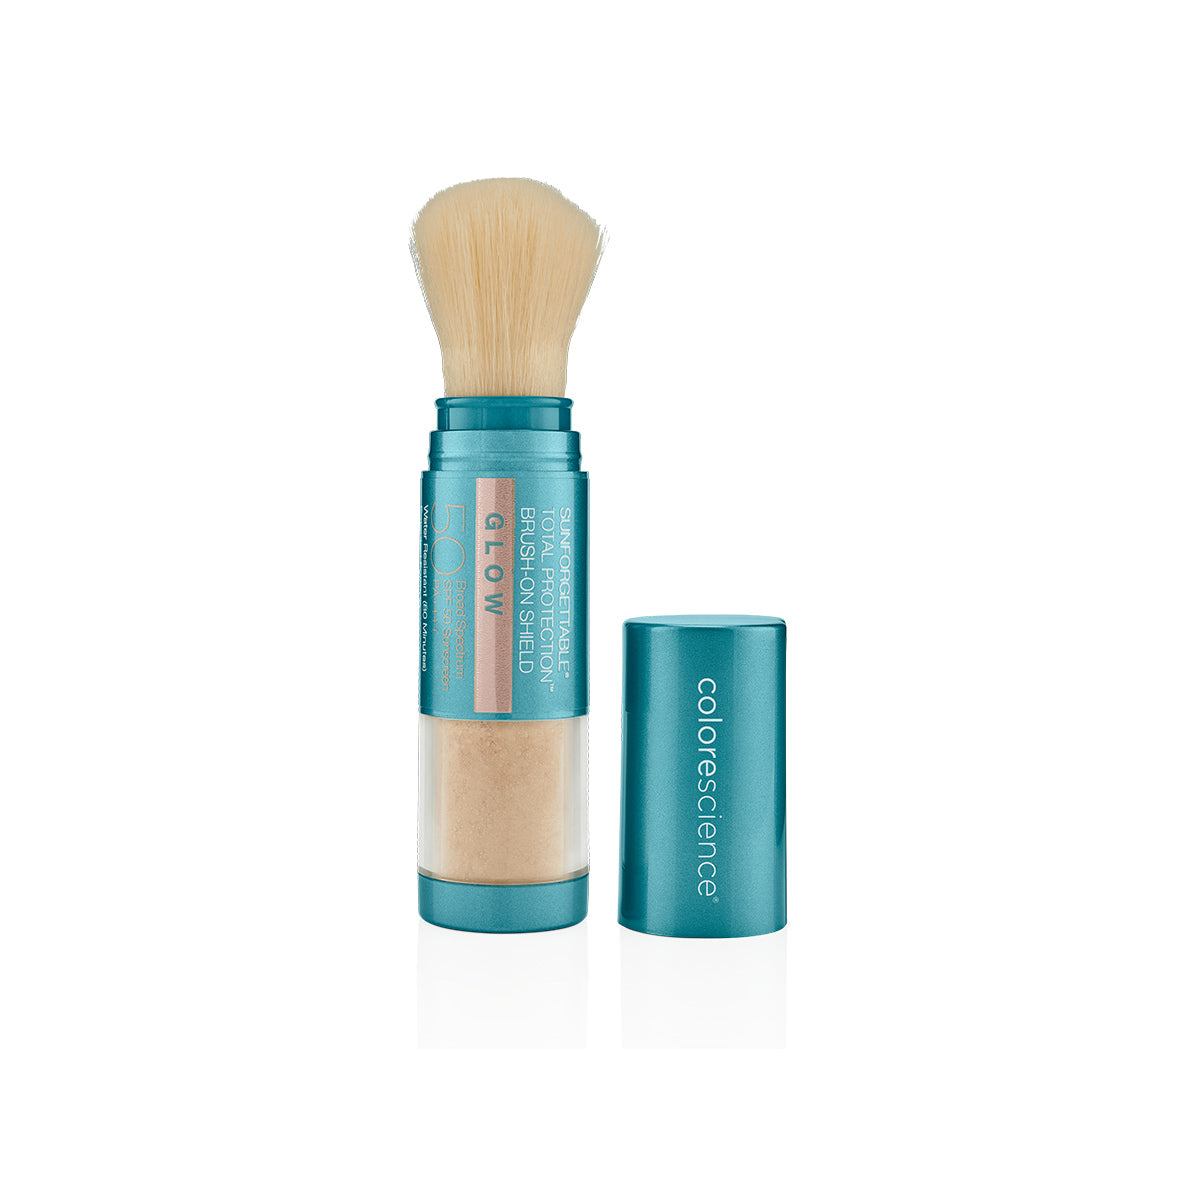 Sunforgettable Total Protection Brush-On Shield Glow 50 SPF .15oz